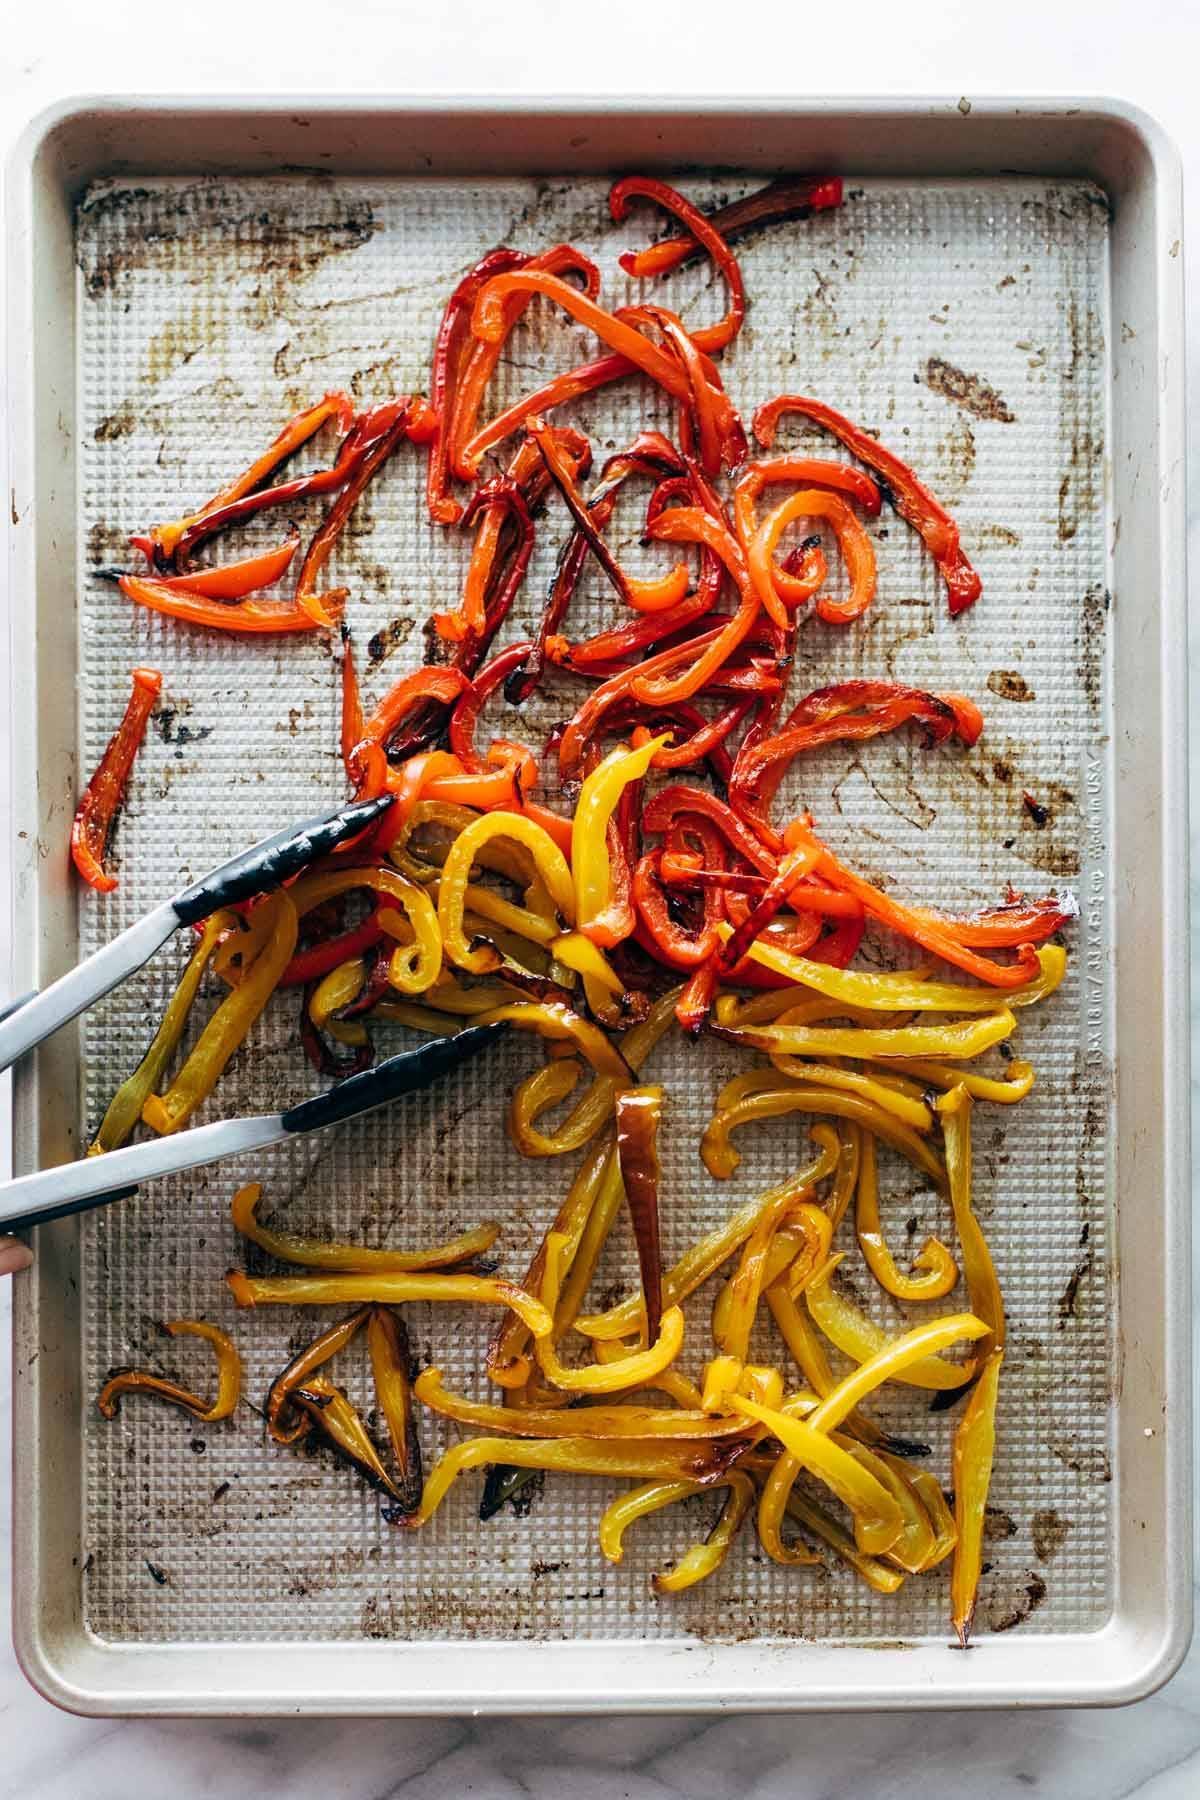 Roasted peppers in a sheet pan.